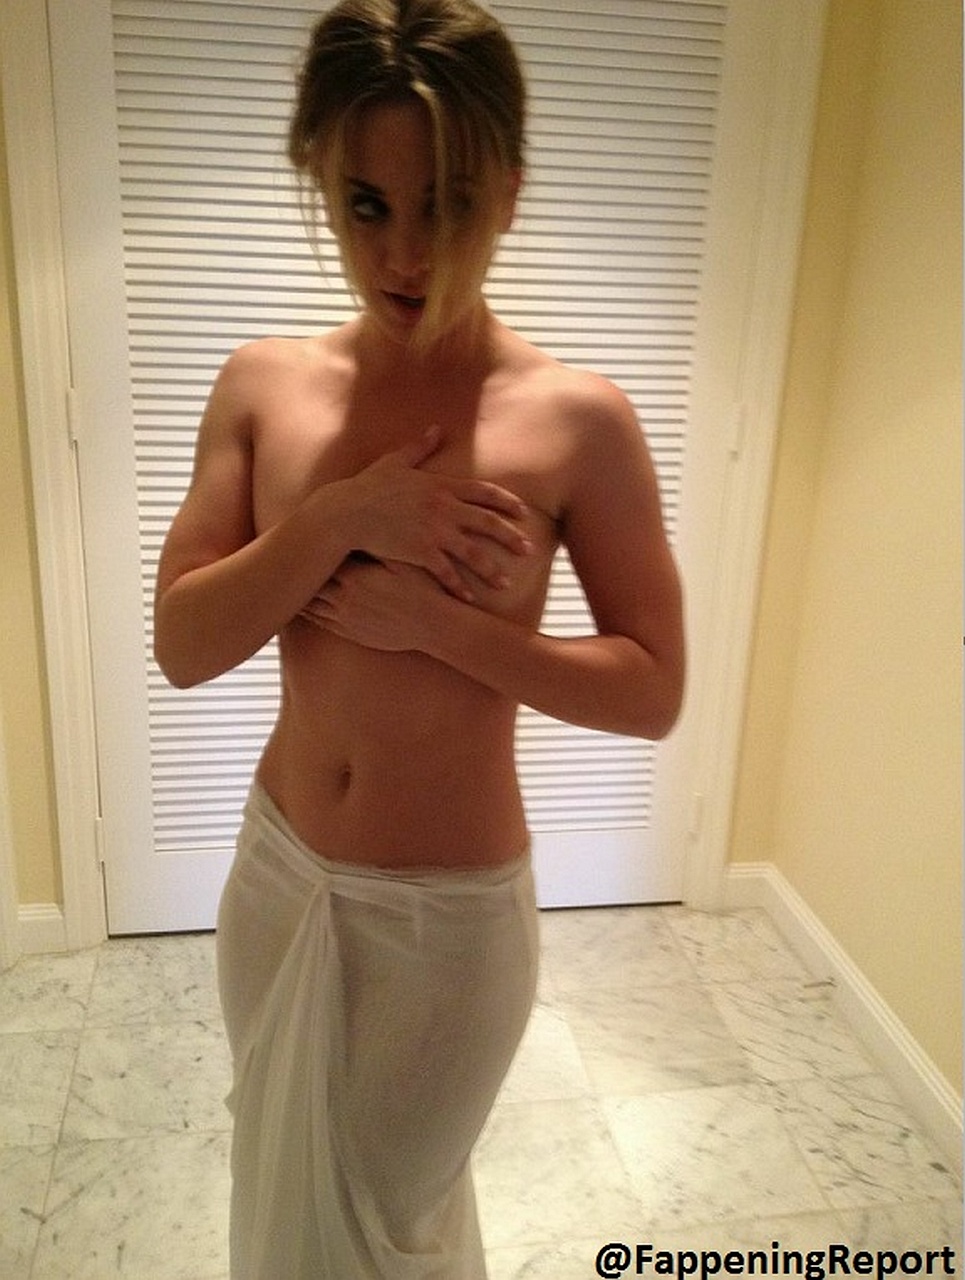 chris kersh recommends has kaley cuoco nude pic